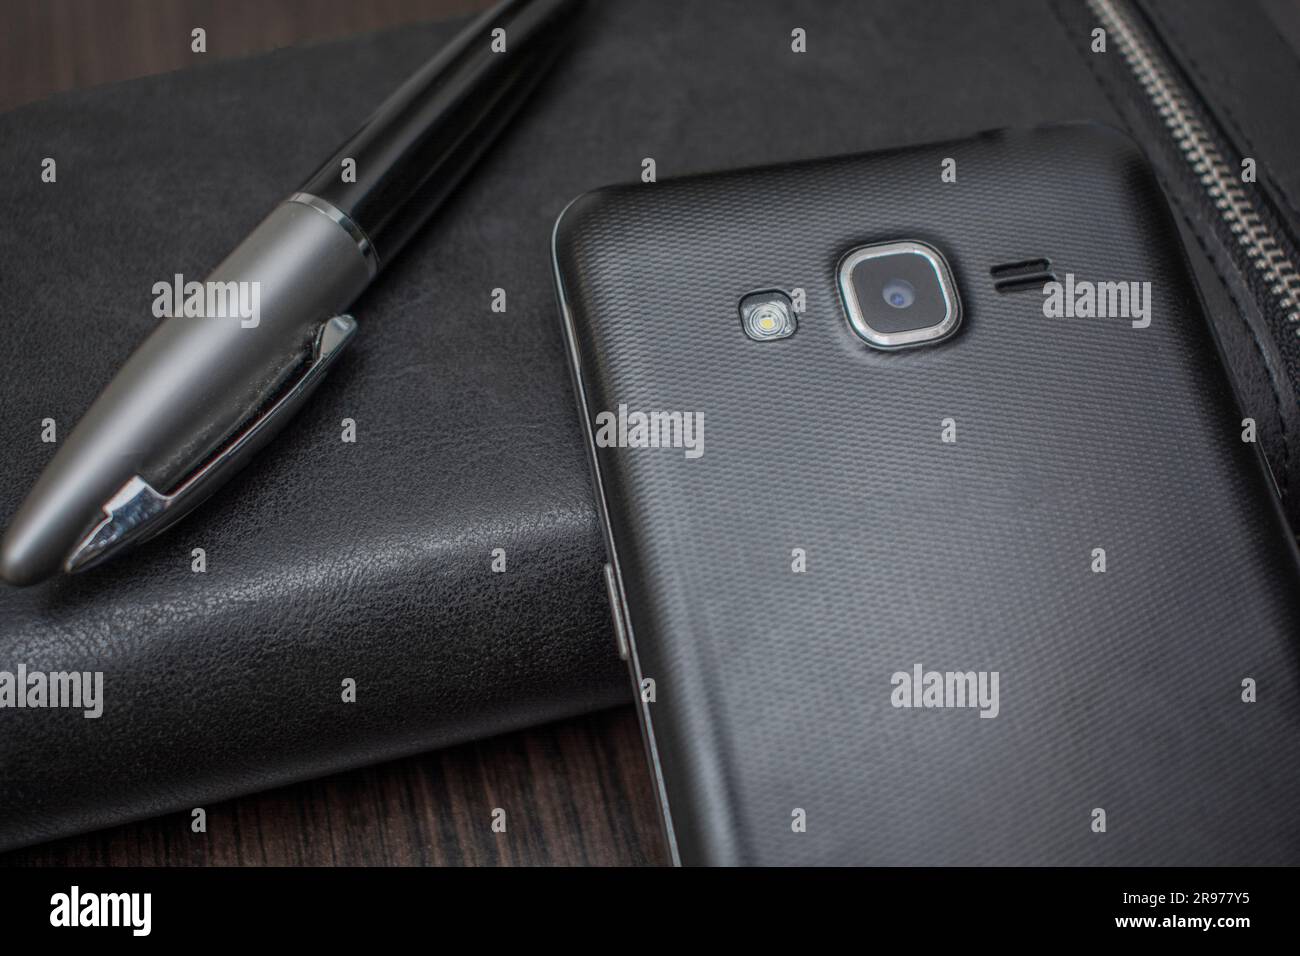 phone with a pen and purse lie on a wooden table background Stock Photo